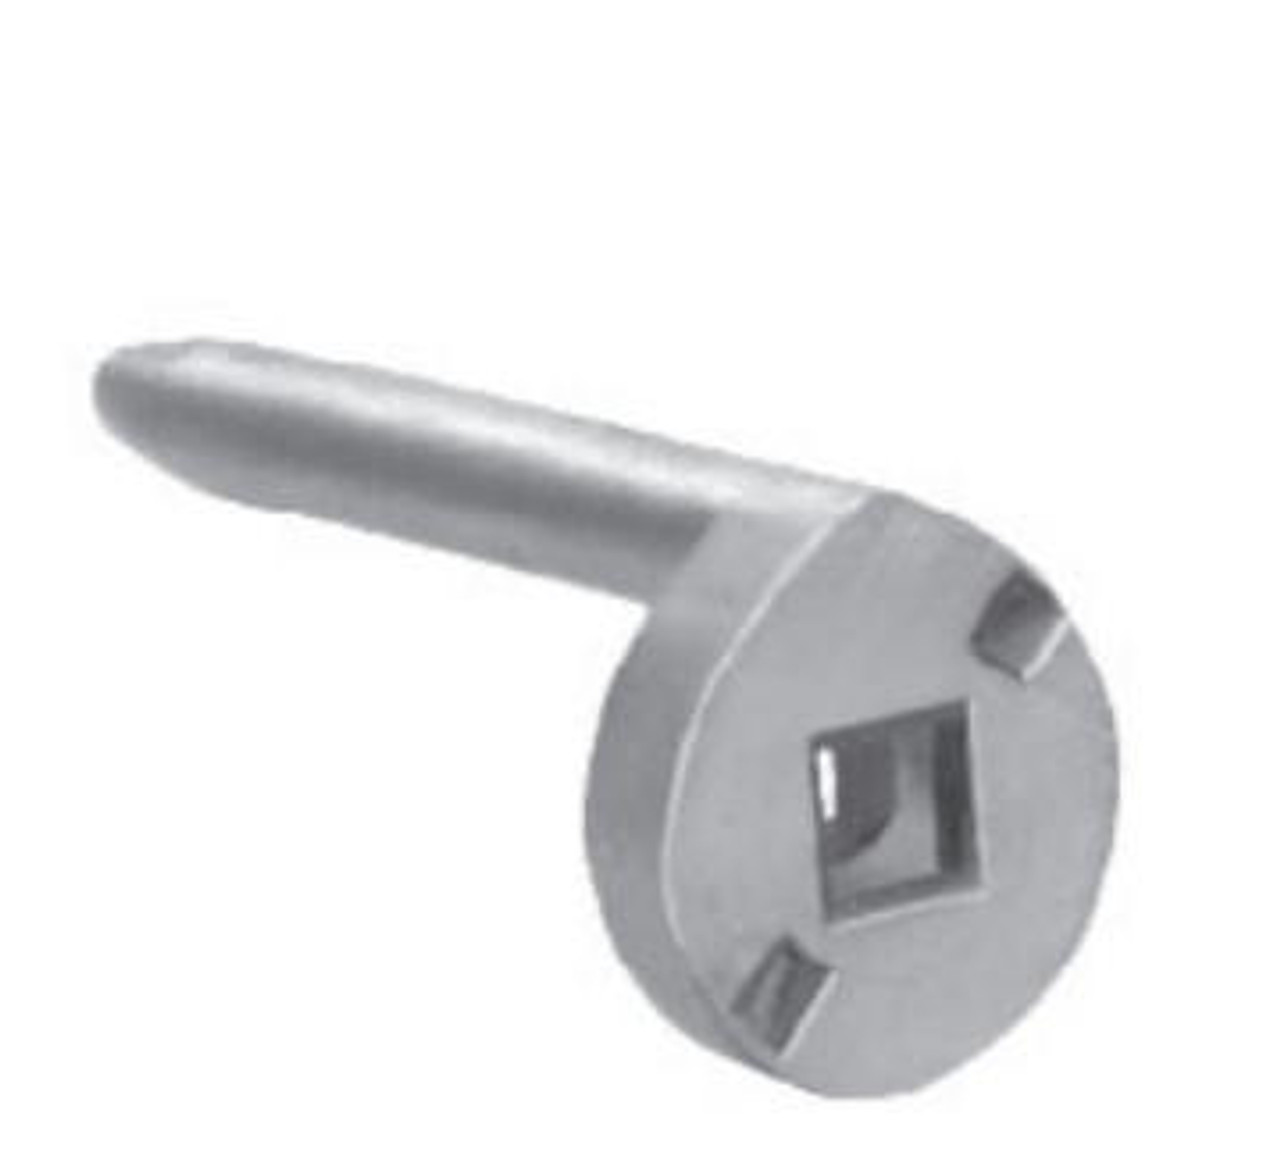 Compx Security Products Compx 1-1/2" Pin Cam C7021-2C 